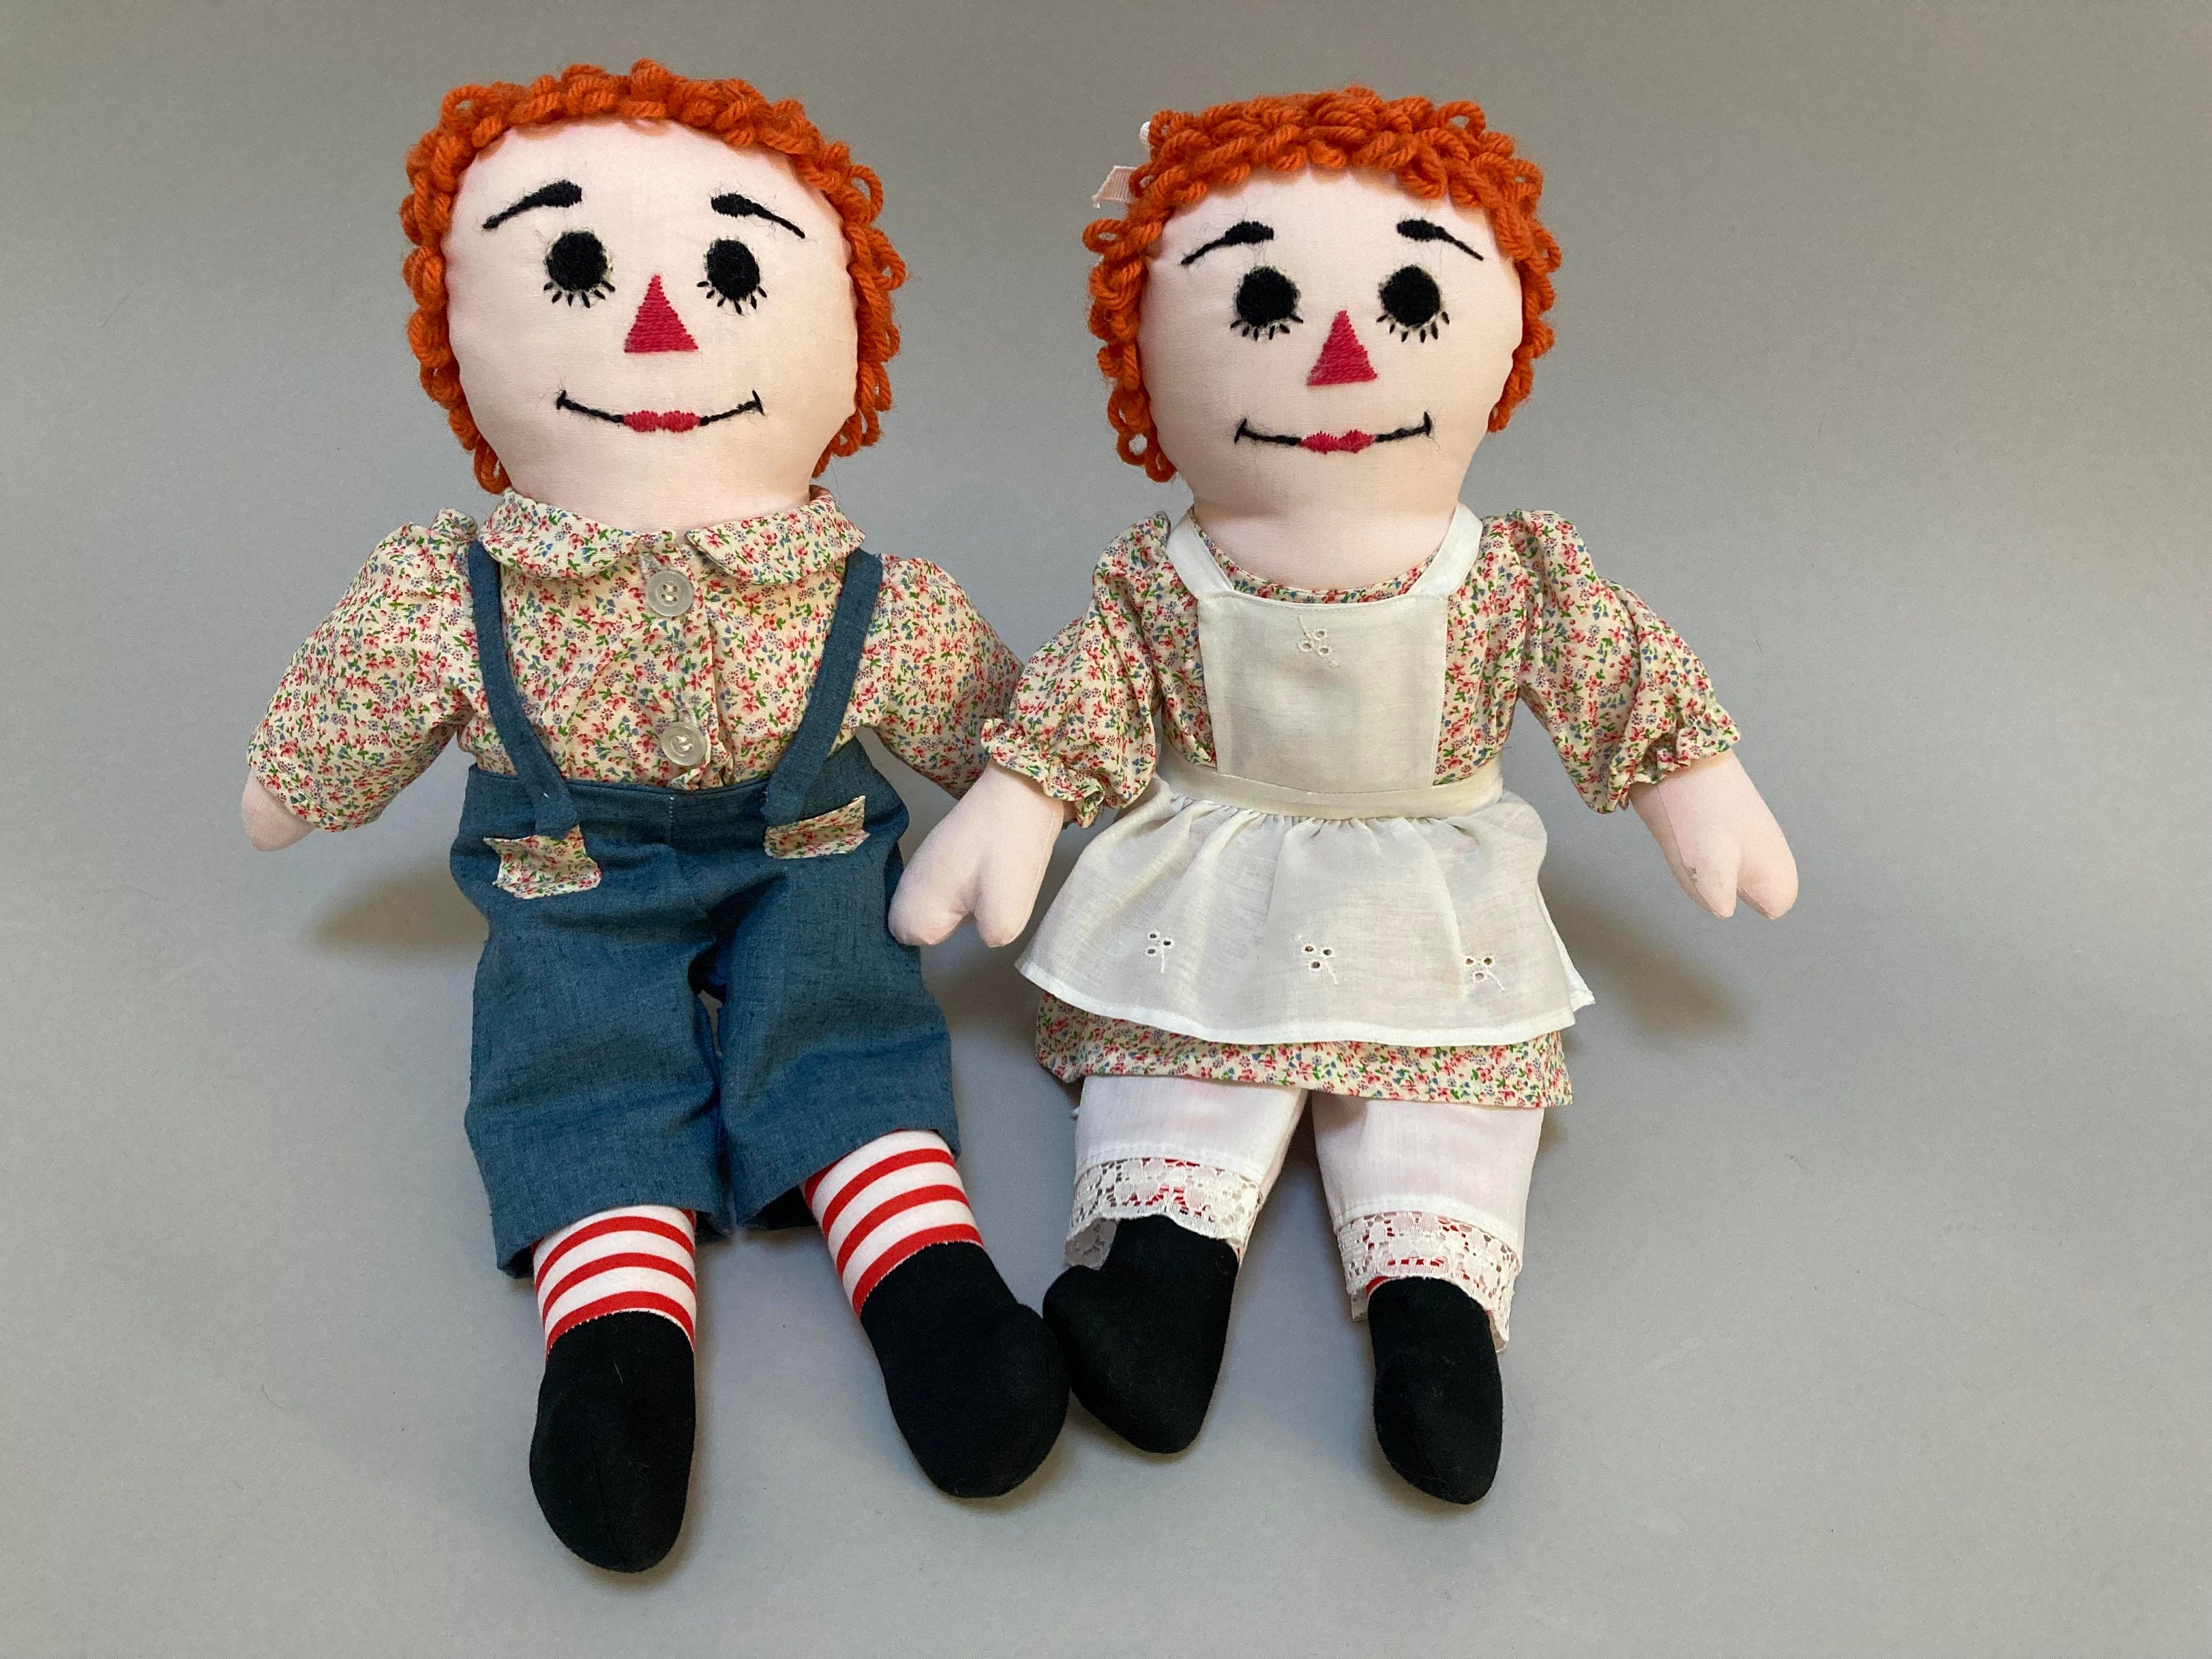 Vintage 1970s Handmade Raggedy Ann and Andy Dolls image